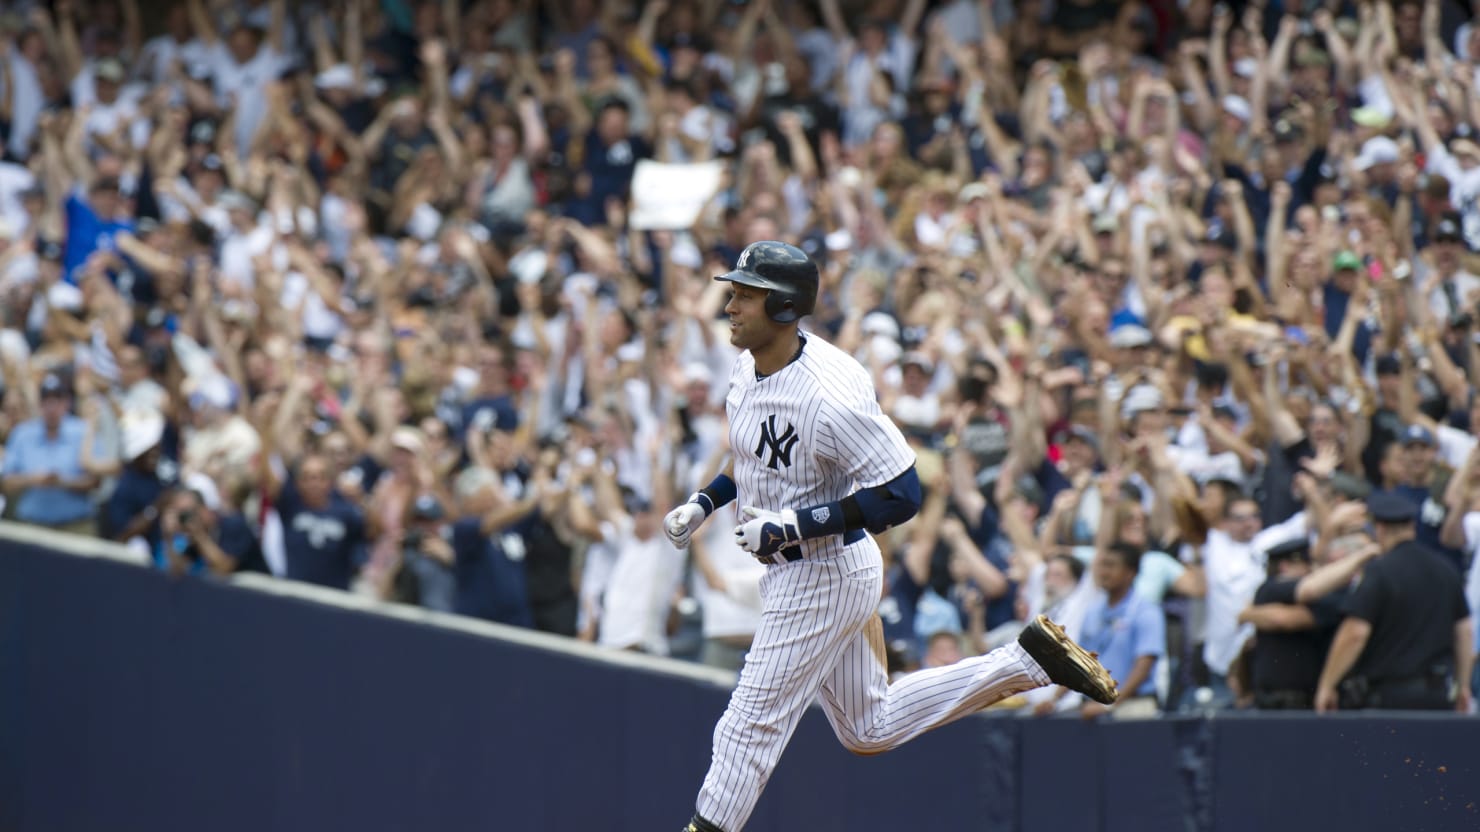 17 Pictures Of Derek Jeter That'll Make You Say Yeah, Jeets